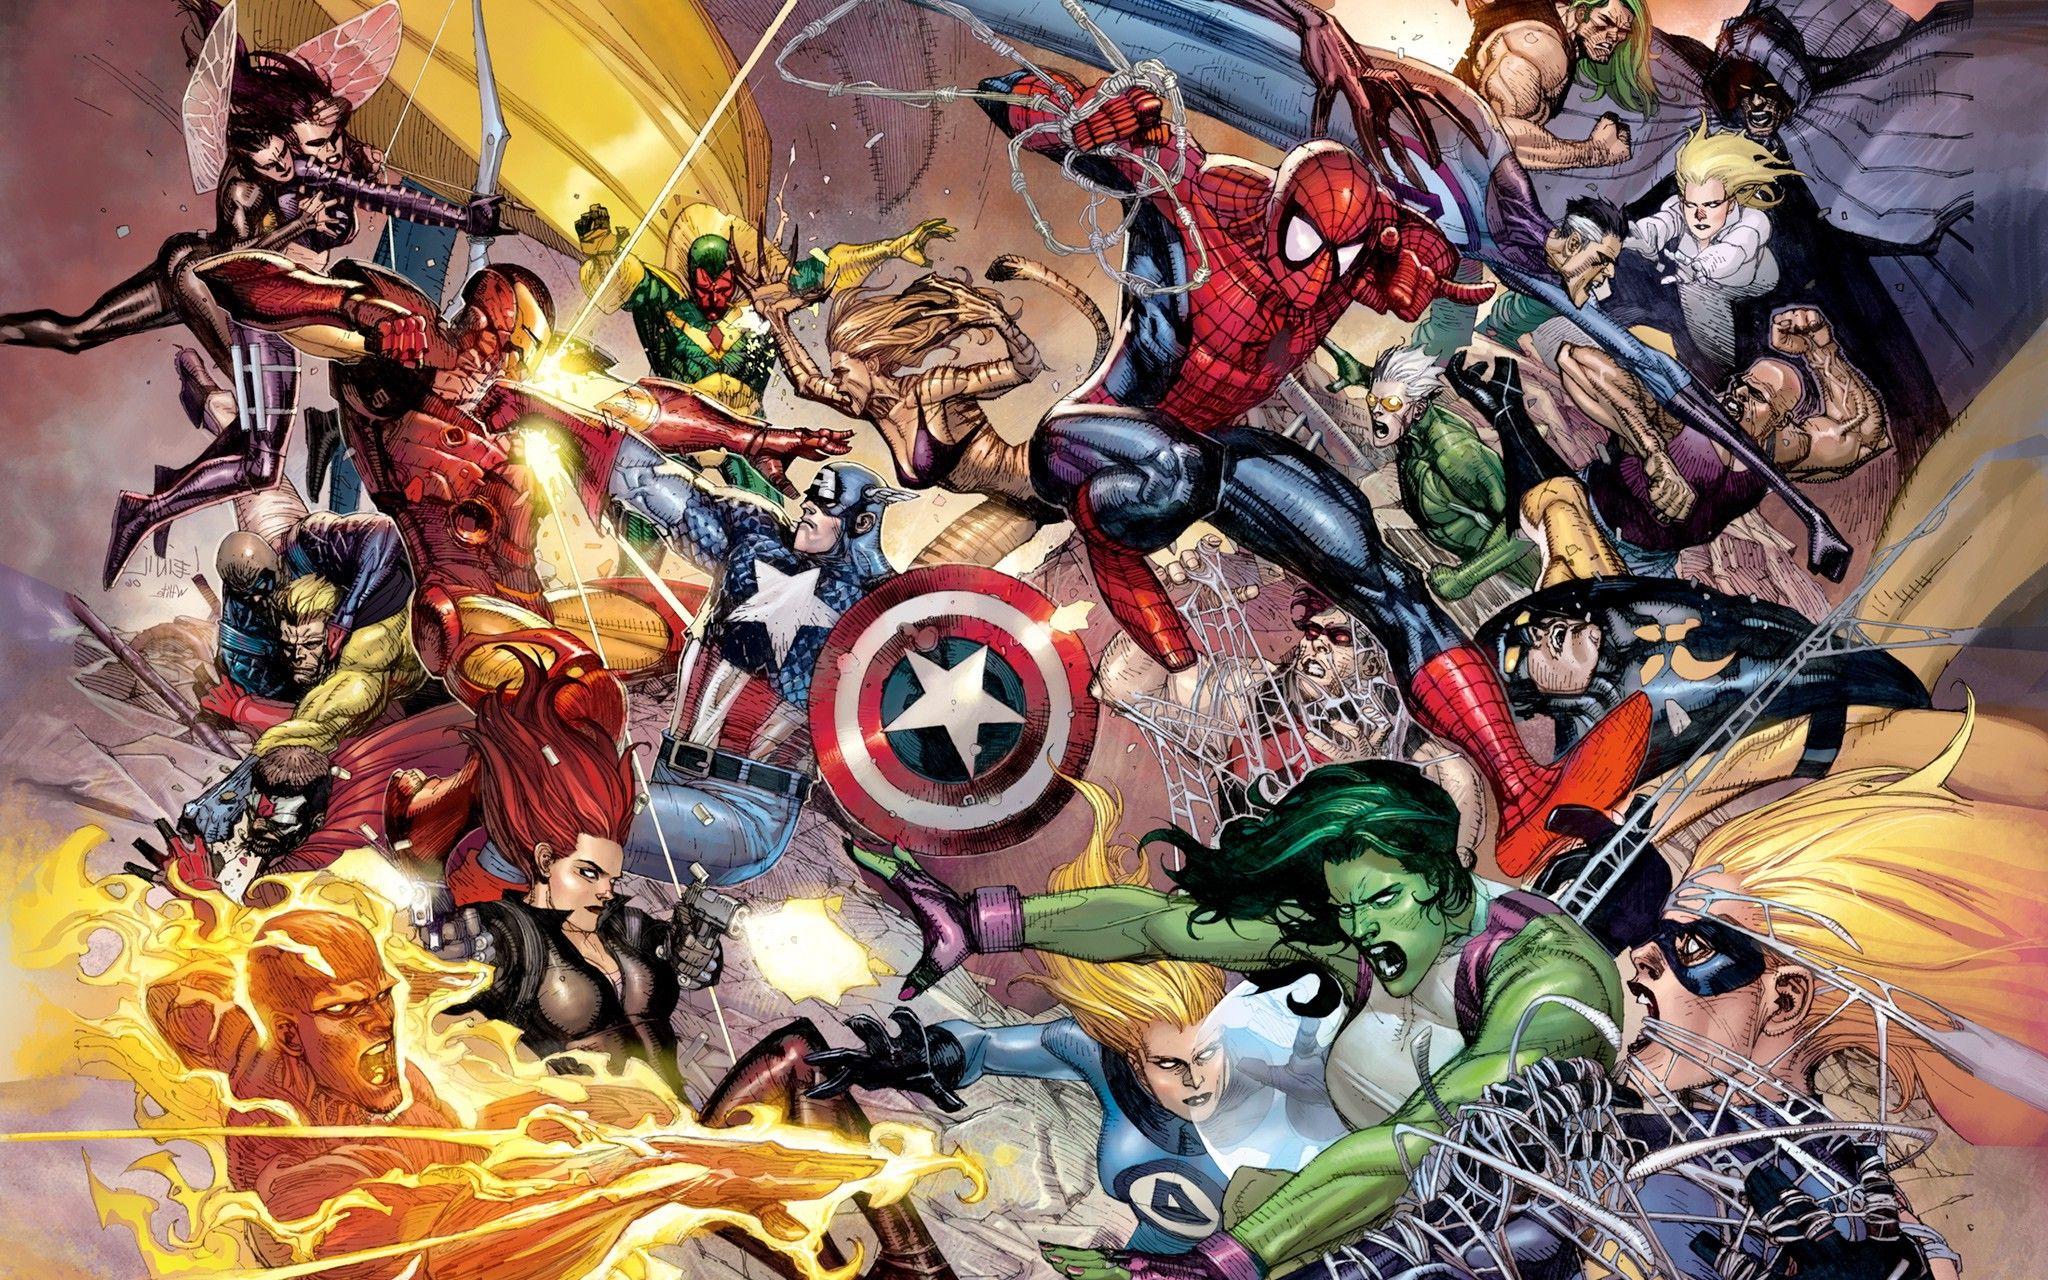 Avengers Gallery Art Wallpaper Mural | Sideshow Collectibles